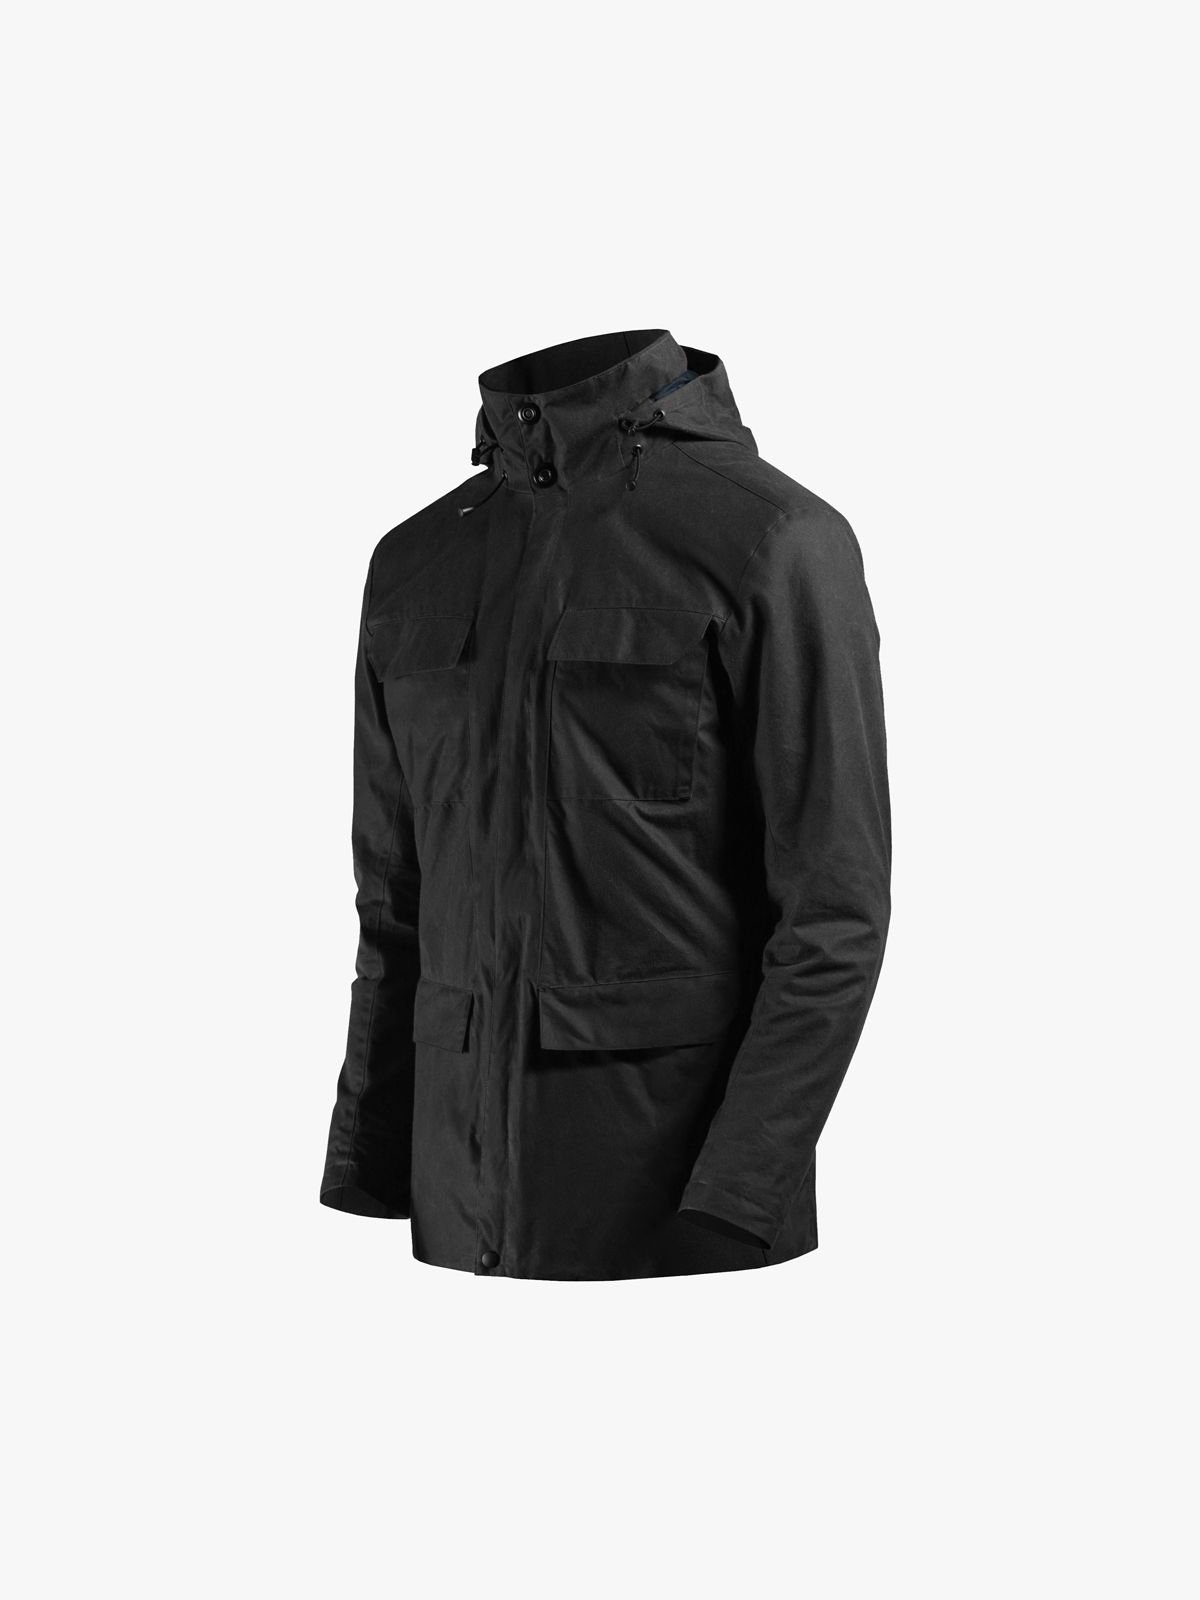 Eiger Waxed Canvas Jacket by Mission Workshop - Weatherproof Bags & Technical Apparel - San Francisco & Los Angeles - Built to endure - Guaranteed forever